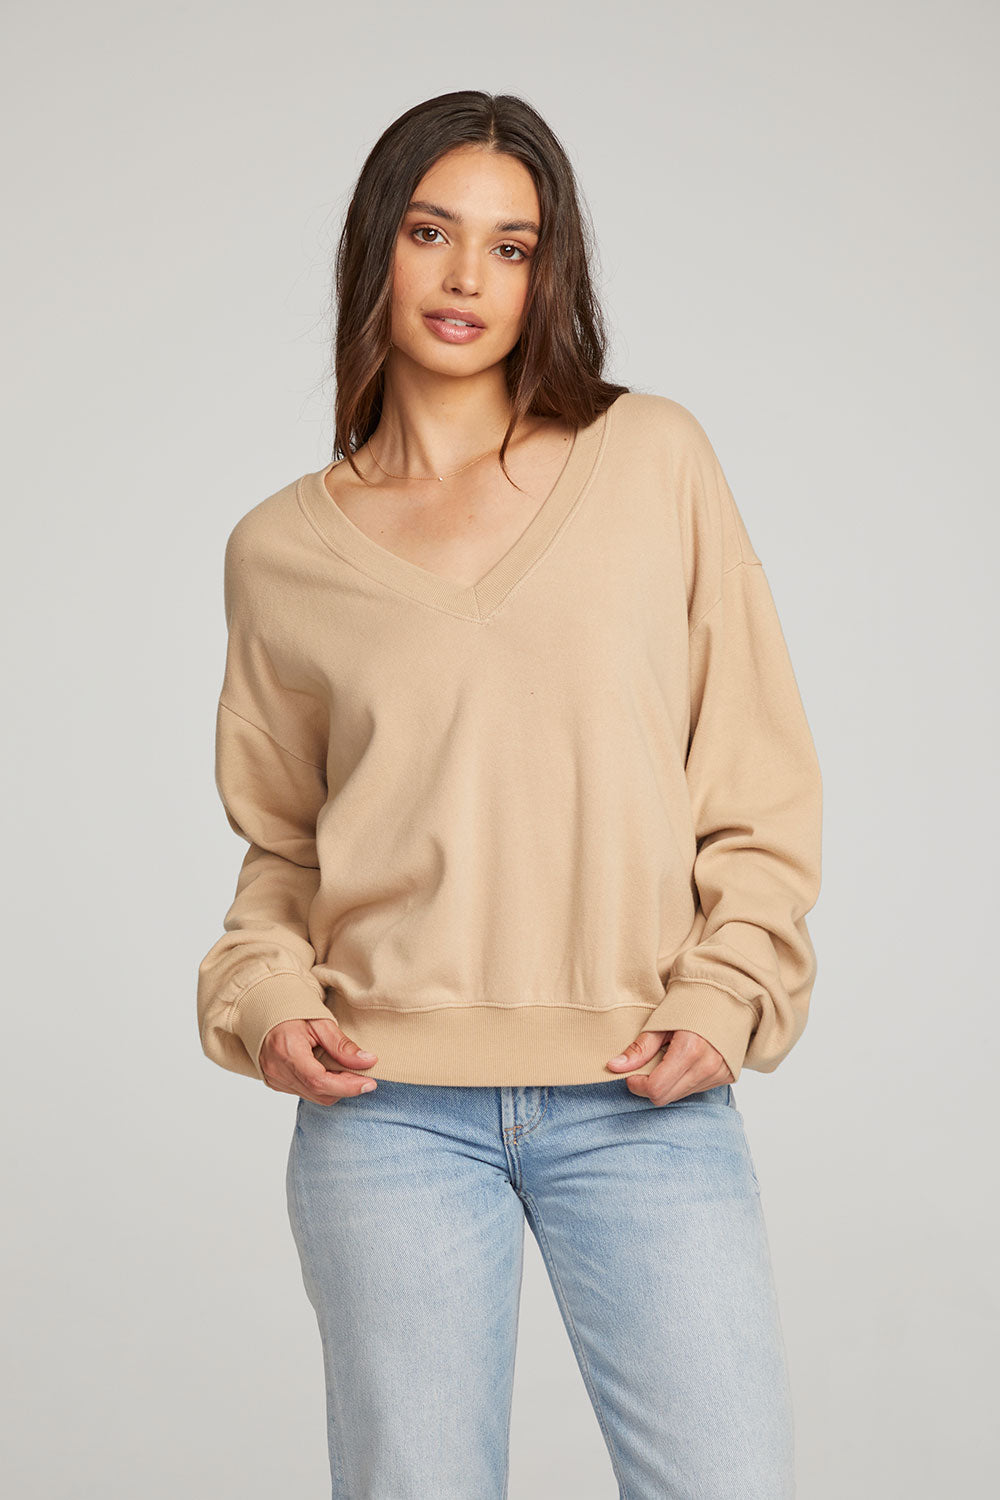 Poppy Cappuccino Pullover WOMENS chaserbrand